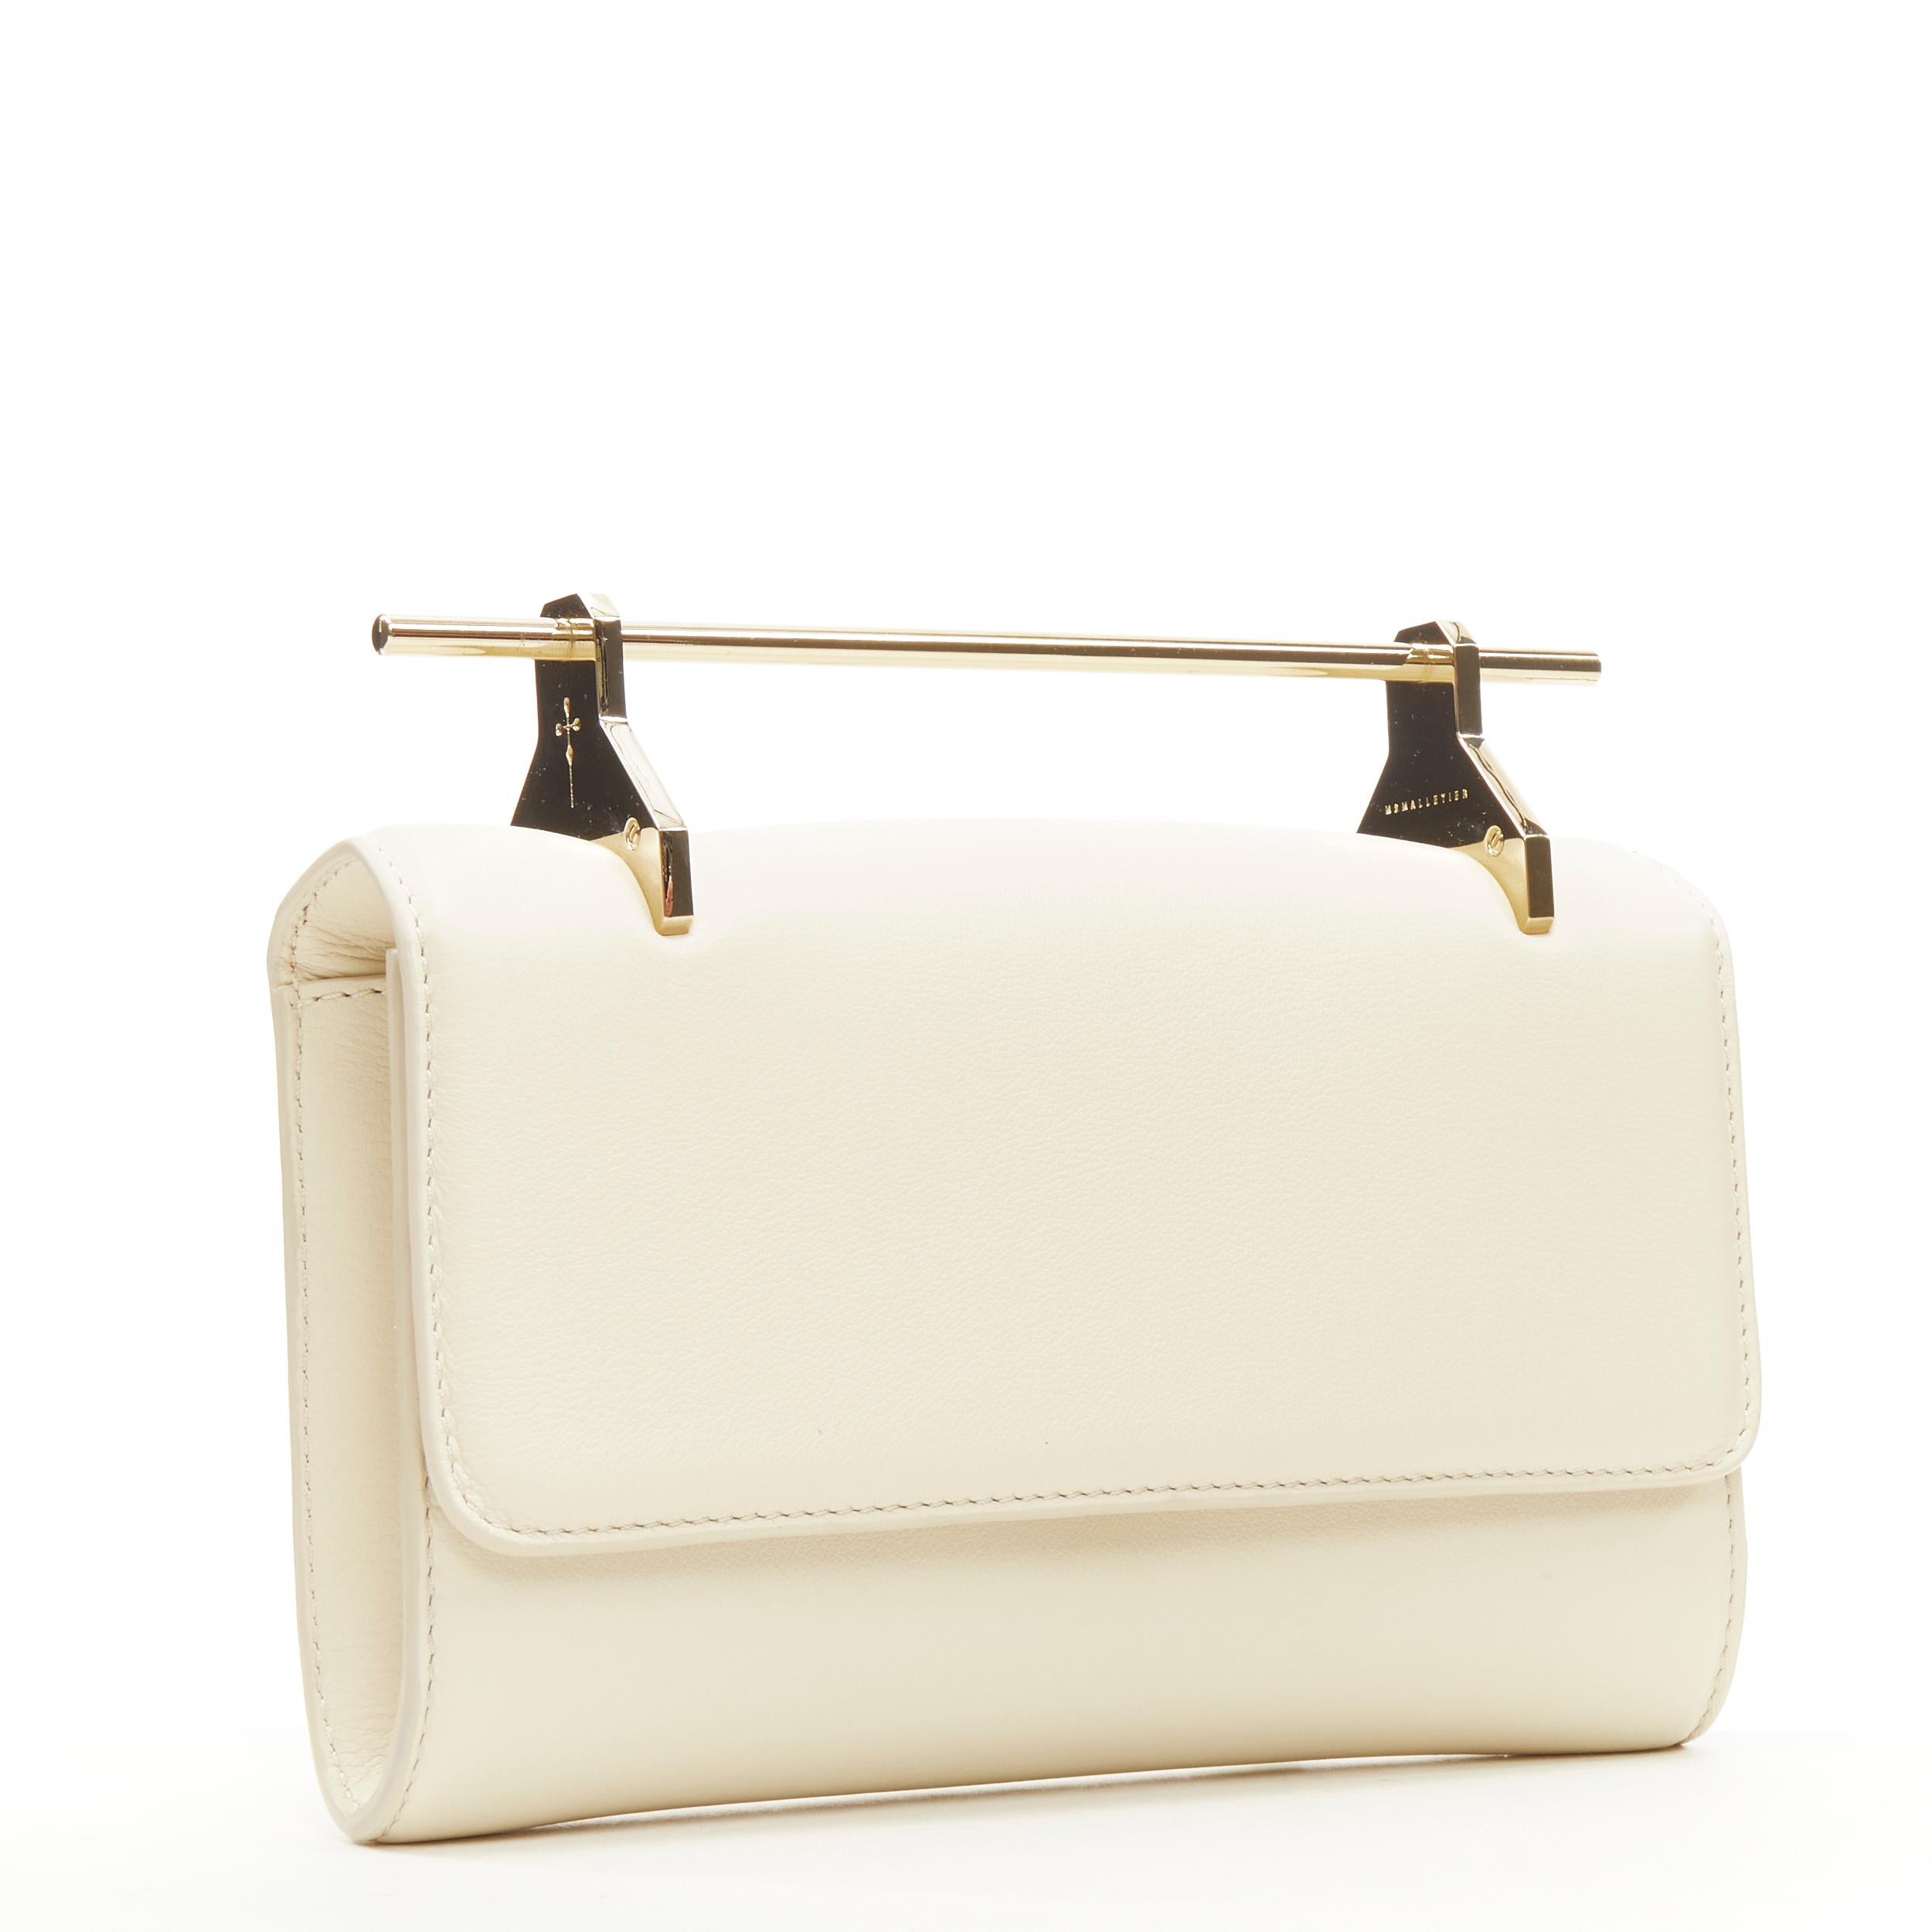 M2MALLETIER Signature gold bar handle ivory leather flap